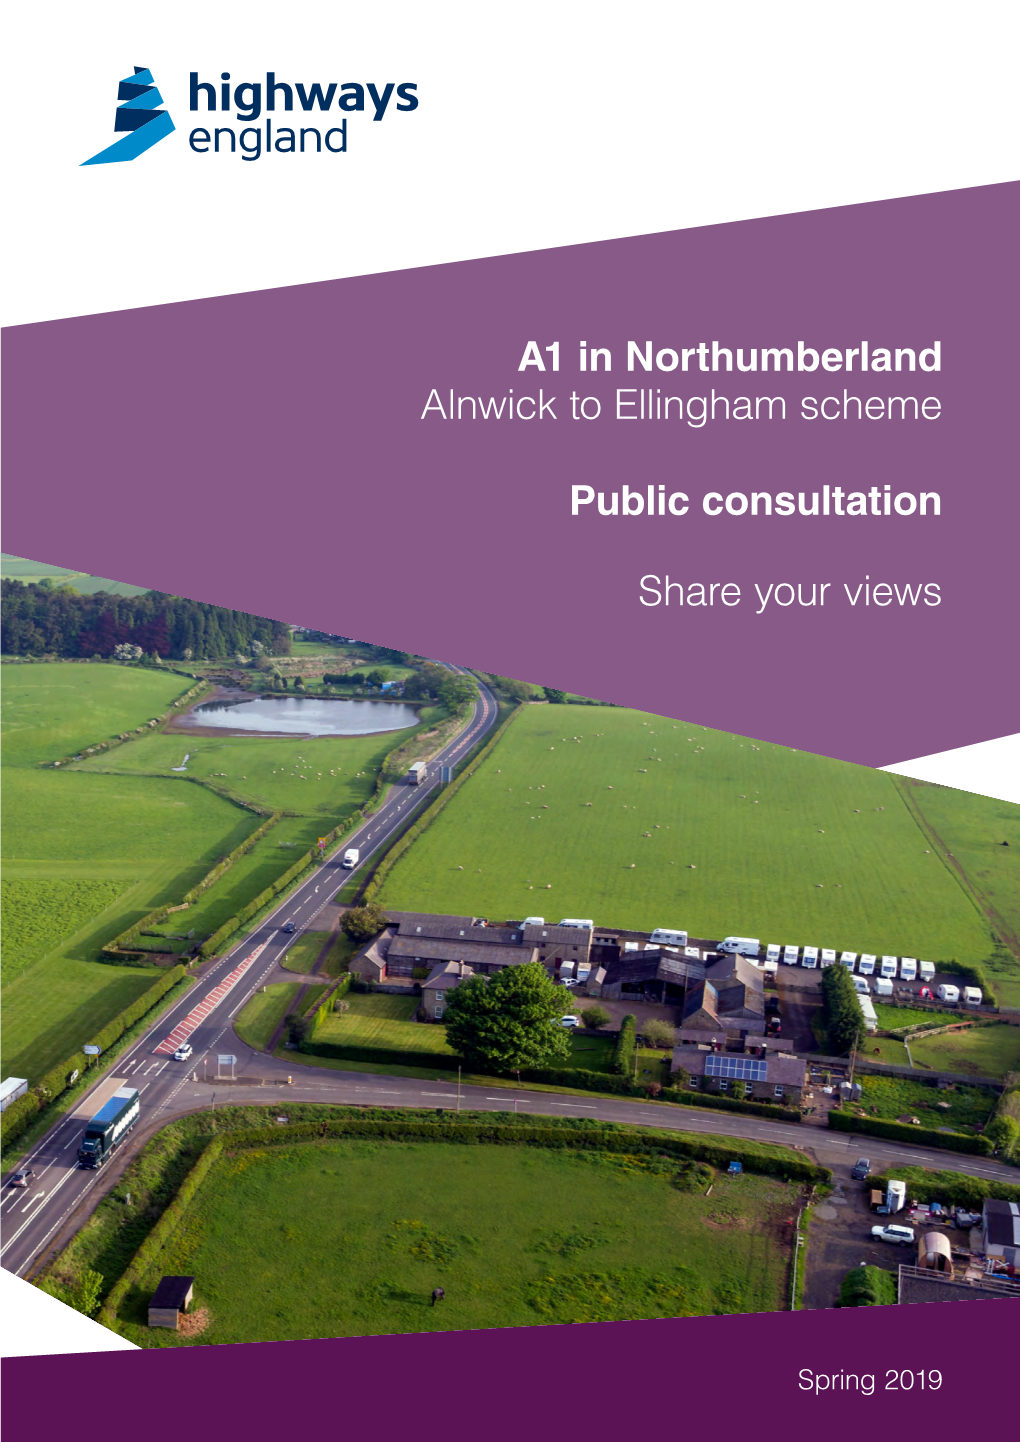 A1 in Northumberland Alnwick to Ellingham Scheme Public